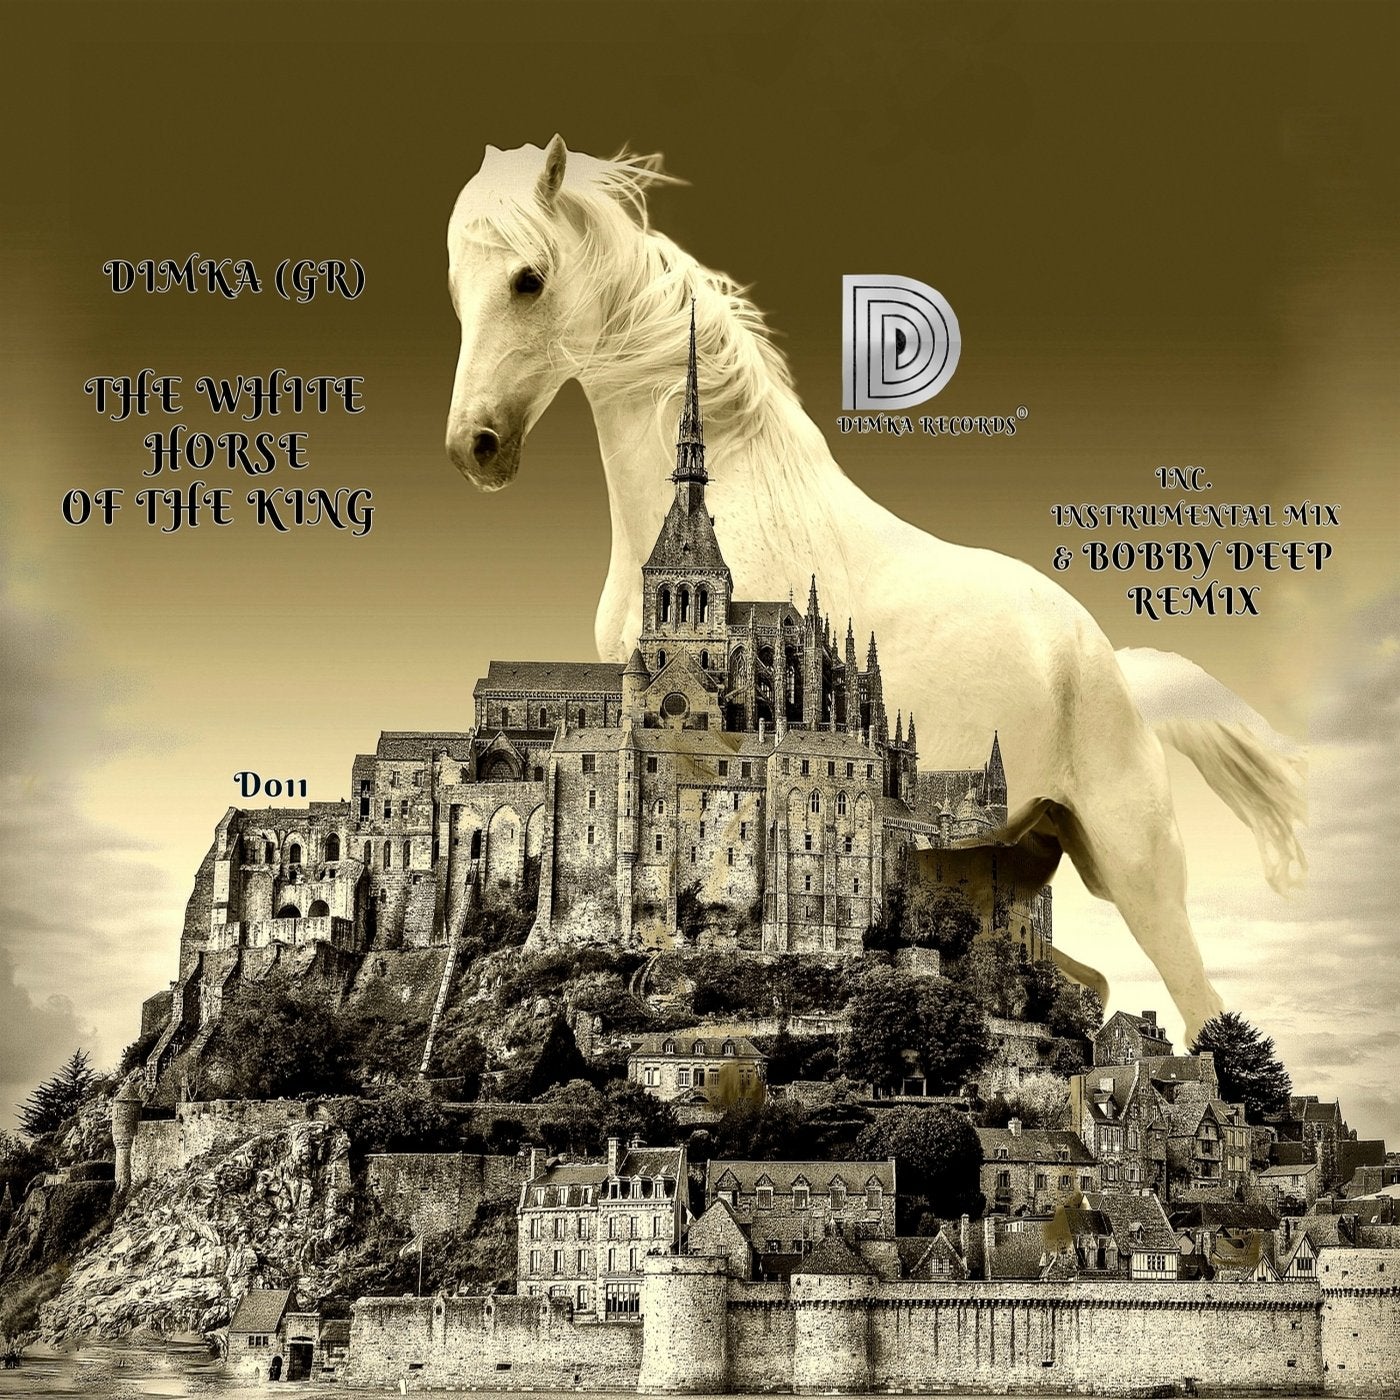 The White Horse of the King